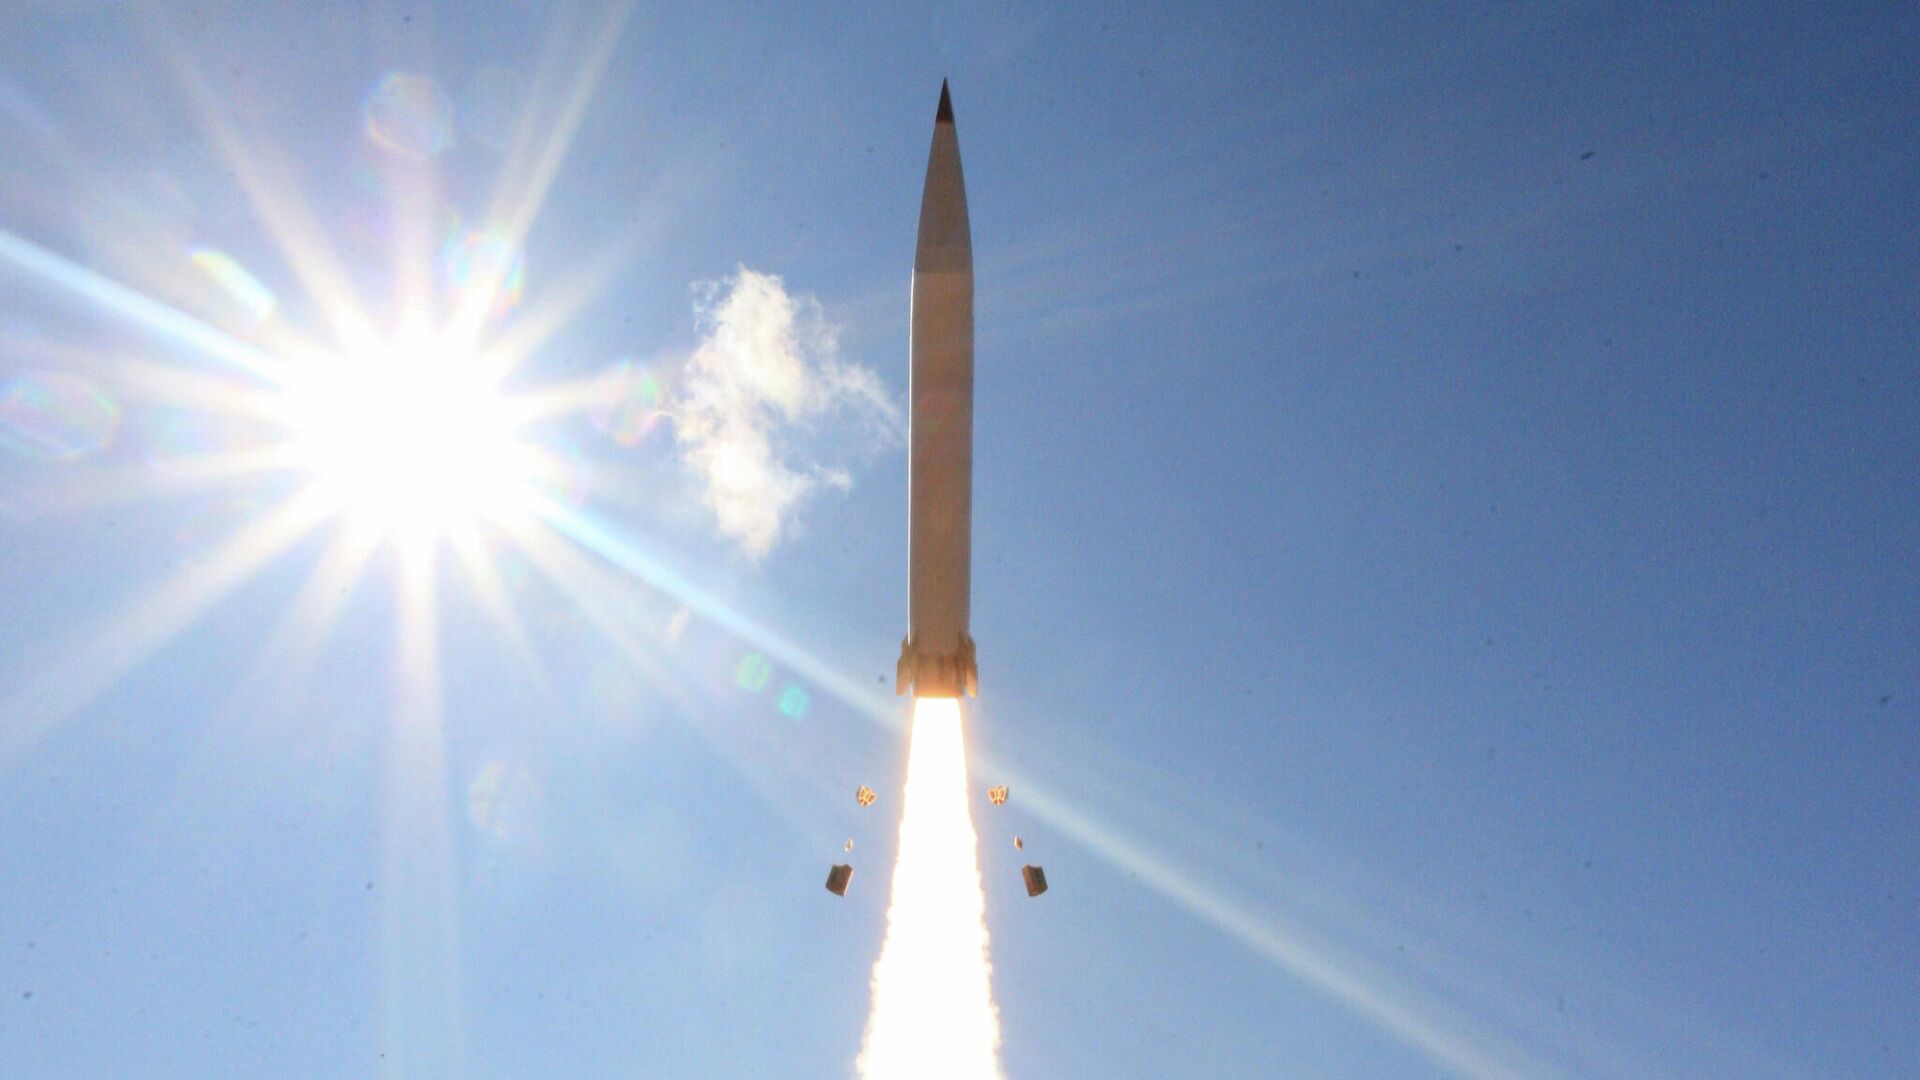 An M142 High Mobility Artillery Rocket System launches a Precision Strike Missile on Dec. 10, 2019, at White Sands Missile Range, New Mexico. HIMARS is one of the Army’s front-running munitions that addresses Long Range Precision Fires. - Sputnik International, 1920, 25.05.2022